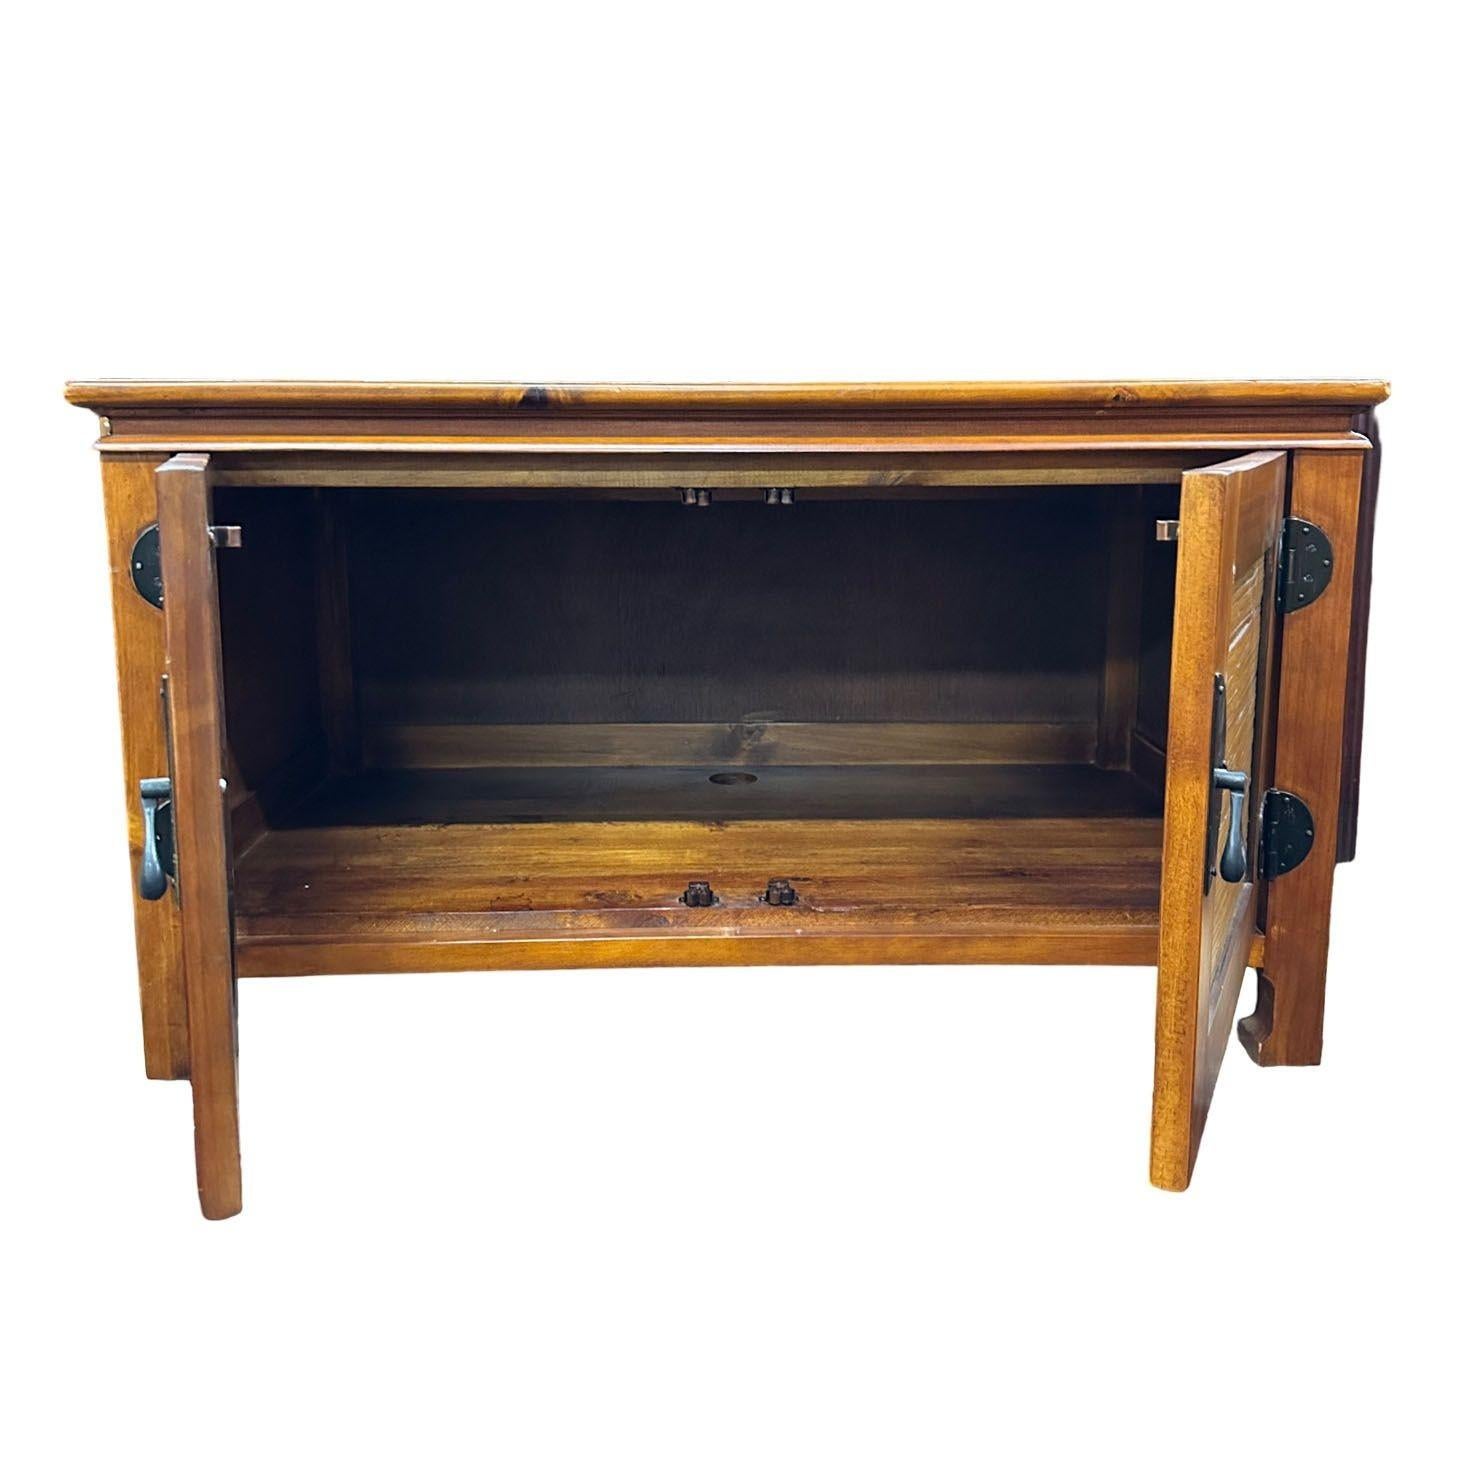 Oriental James Mont Style Koa & Stick Rattan TV Console In Excellent Condition For Sale In Van Nuys, CA